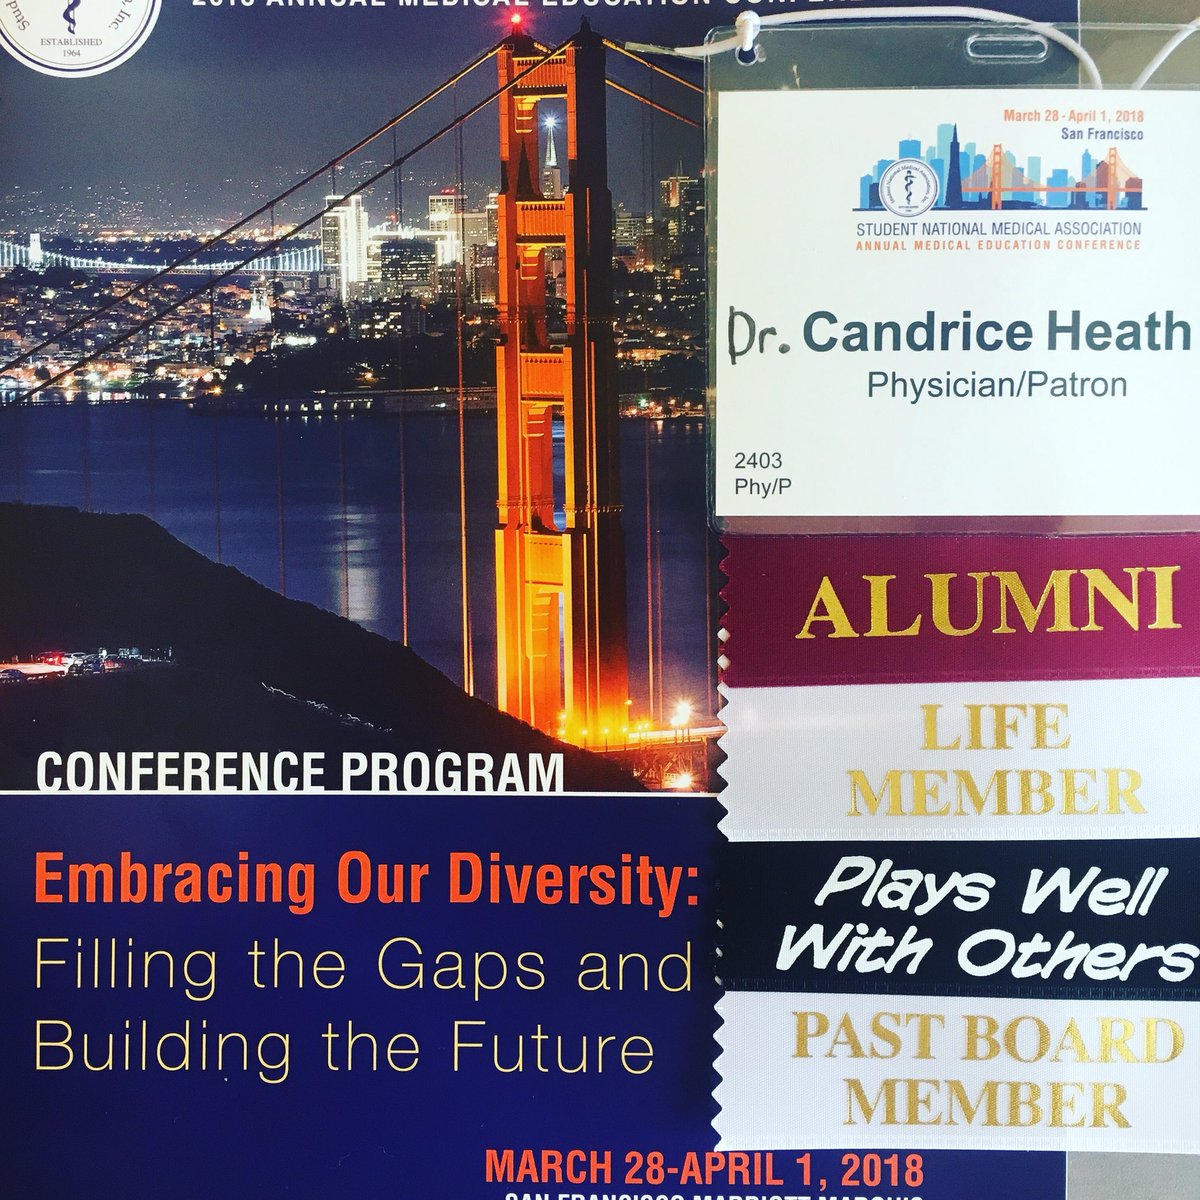 I LOVE the SNMA! Shout out to the American Academy of Dermatology (@AADMember), Skin of Color Society (@SkinOfColorSociety) and the Society for Investigative Dermatology (@SocietyForInvestigativeDermatology) for partnering to increase diversity in dermatology.